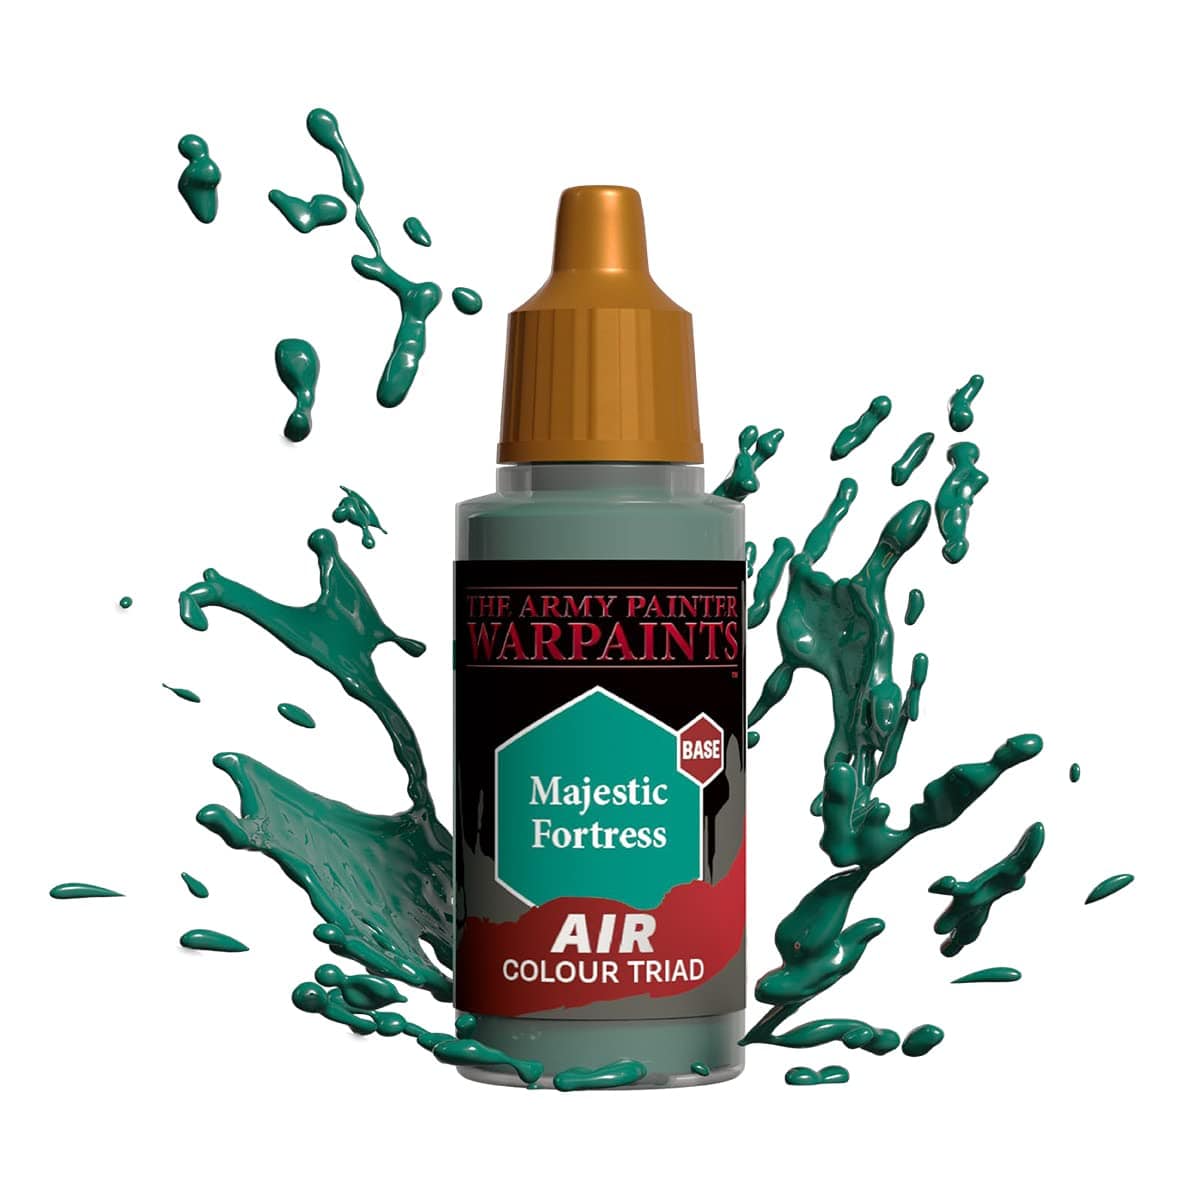 The Army Painter Accessories The Army Painter Warpaints Air: Majestic Fortress 18ml